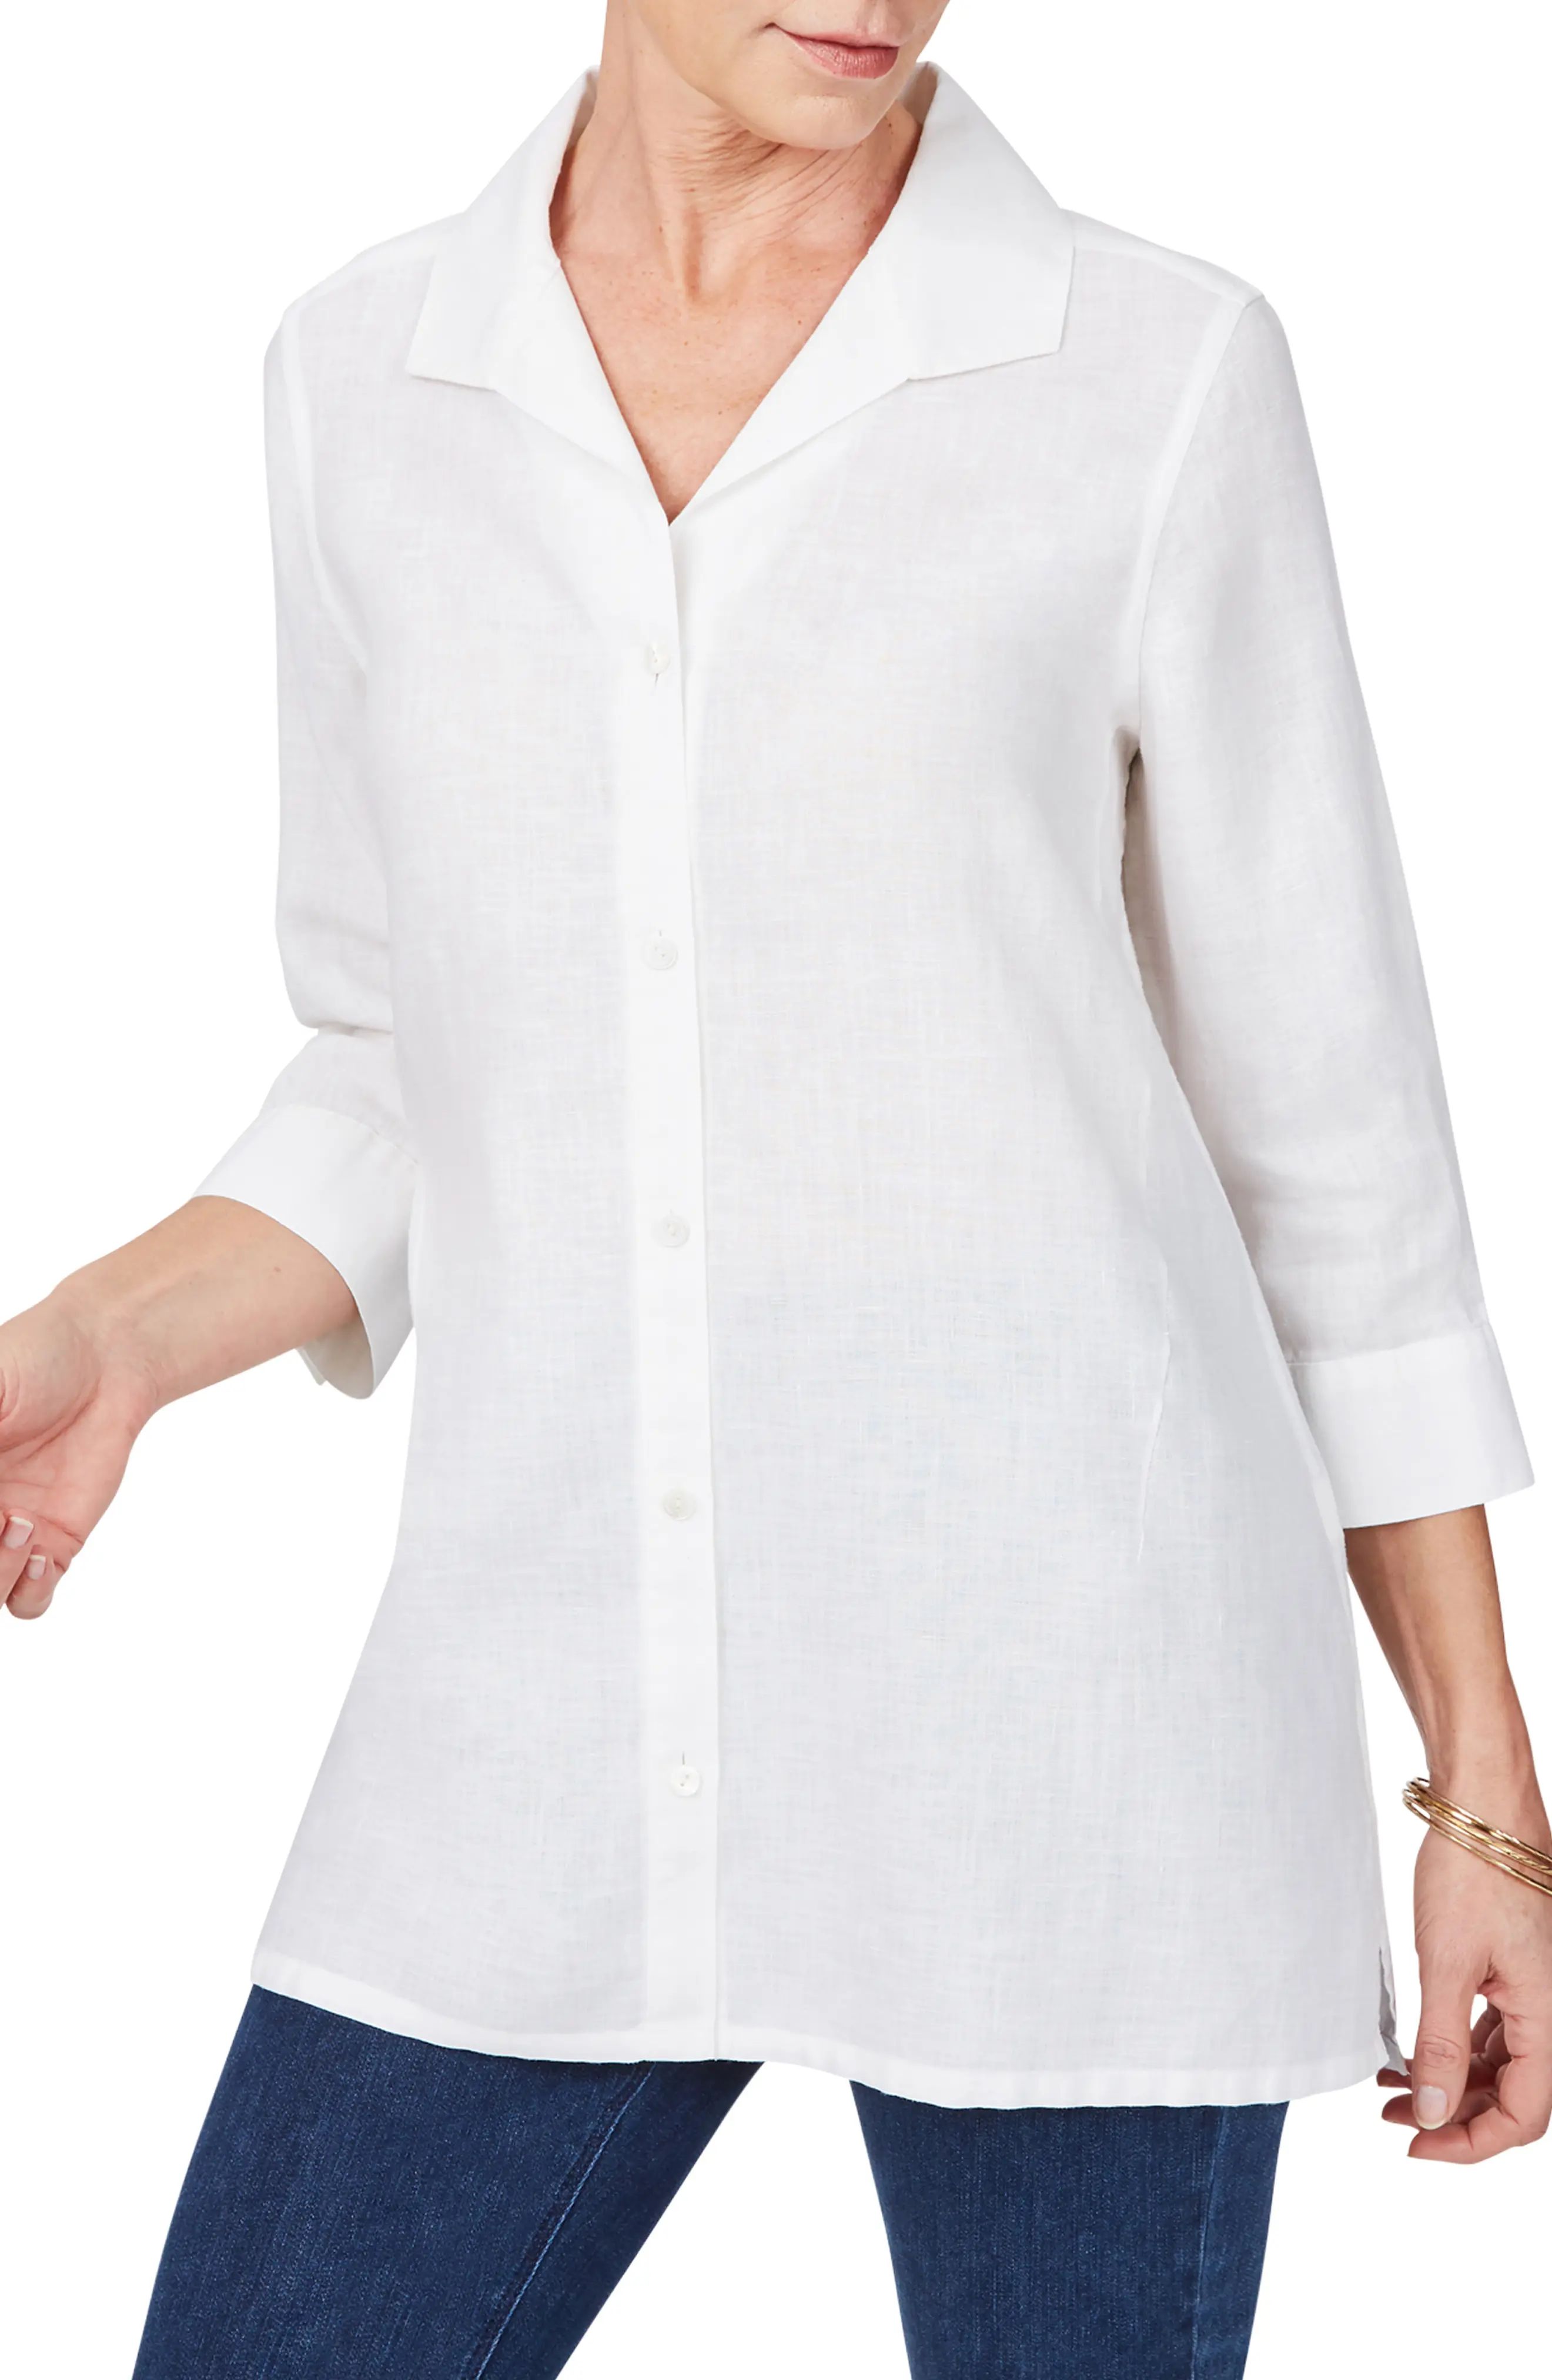 Foxcroft Sterling Button Front Non-Iron Linen Shirt in White at Nordstrom, Size 10 | Nordstrom